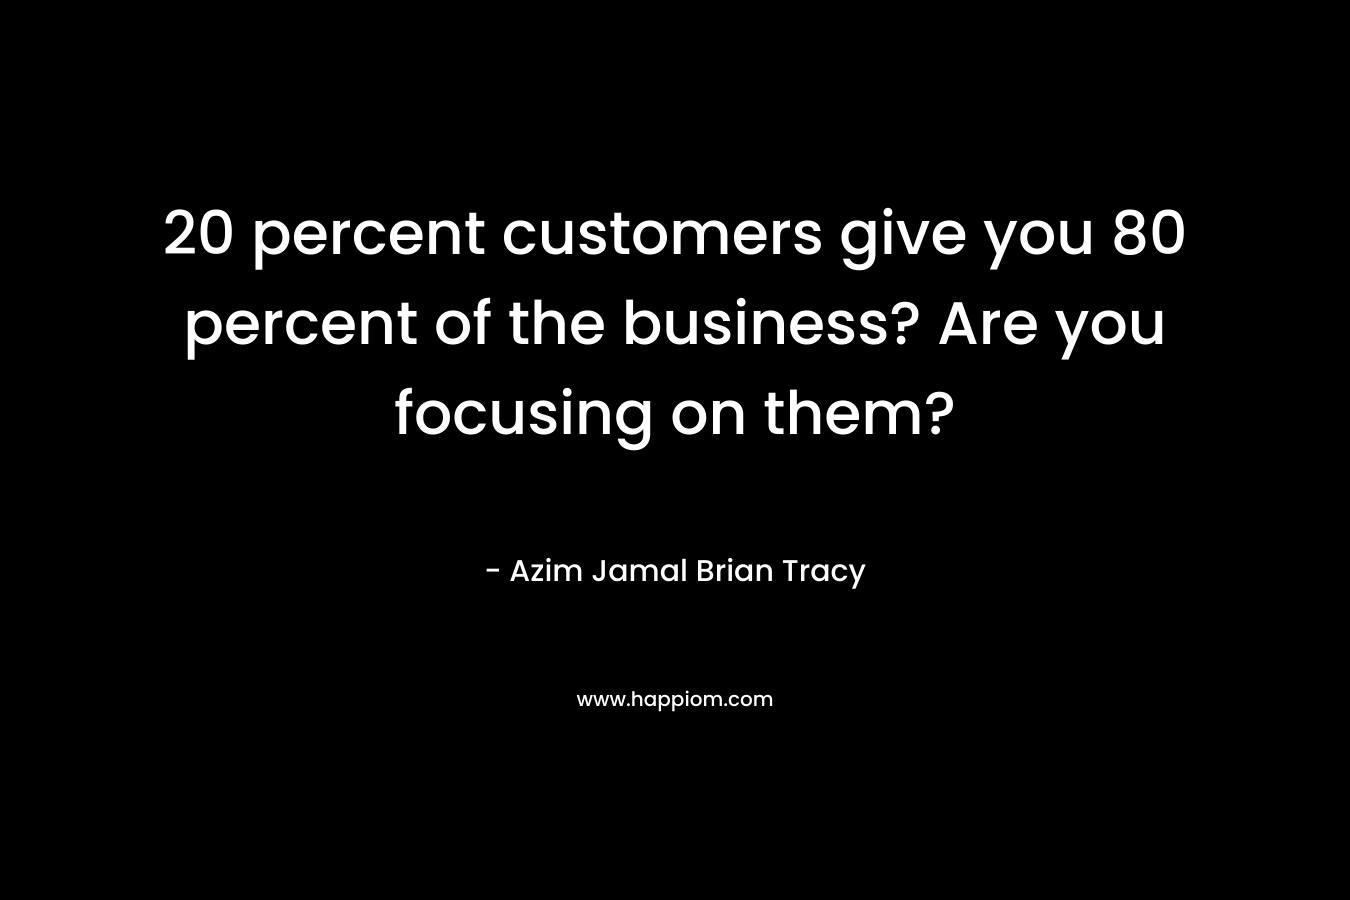 20 percent customers give you 80 percent of the business? Are you focusing on them?